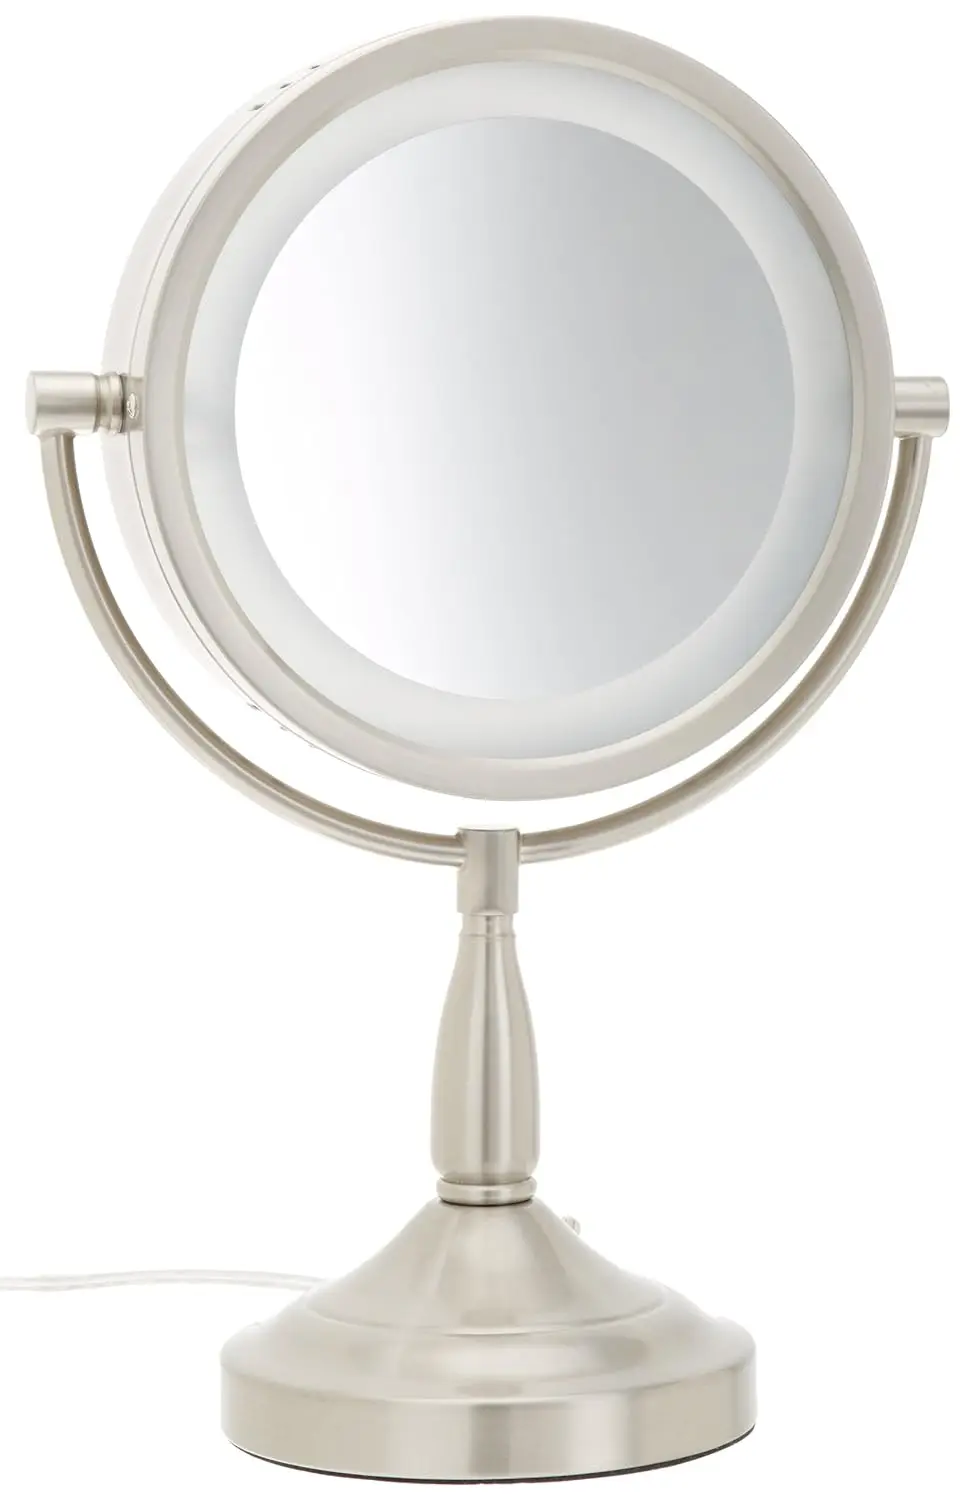 

Tabletop Makeup Mirror - Lighted Makeup Mirror with 1X and 7X Magnification in Nickel Finish - 8.5-Inch Diameter Vanity Mirror